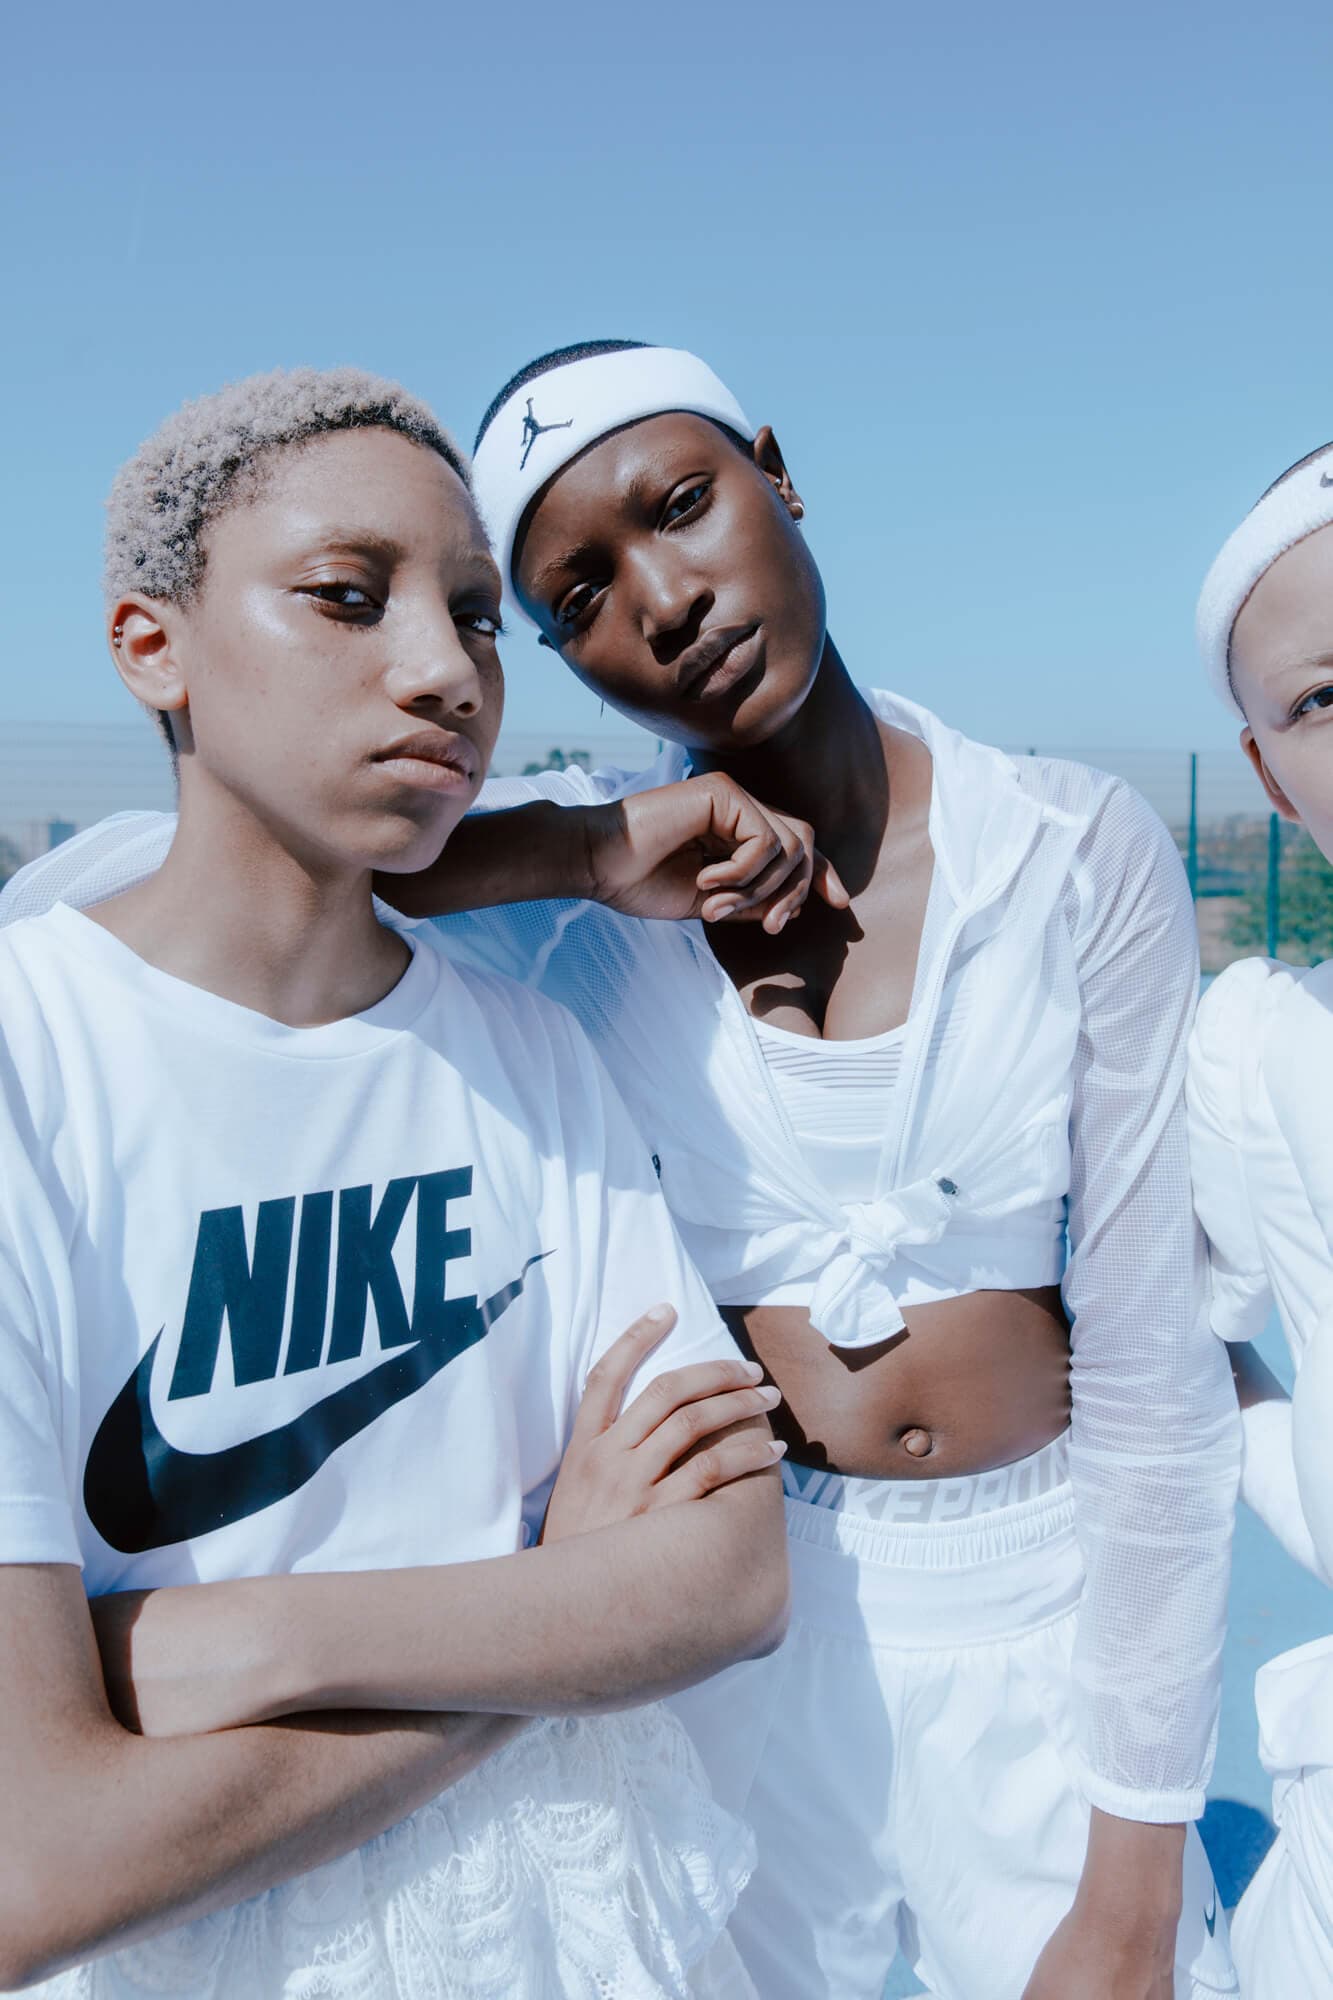 Nike Unlaced, A digital editorial and shopping platform focused on elevating sneaker culture for women